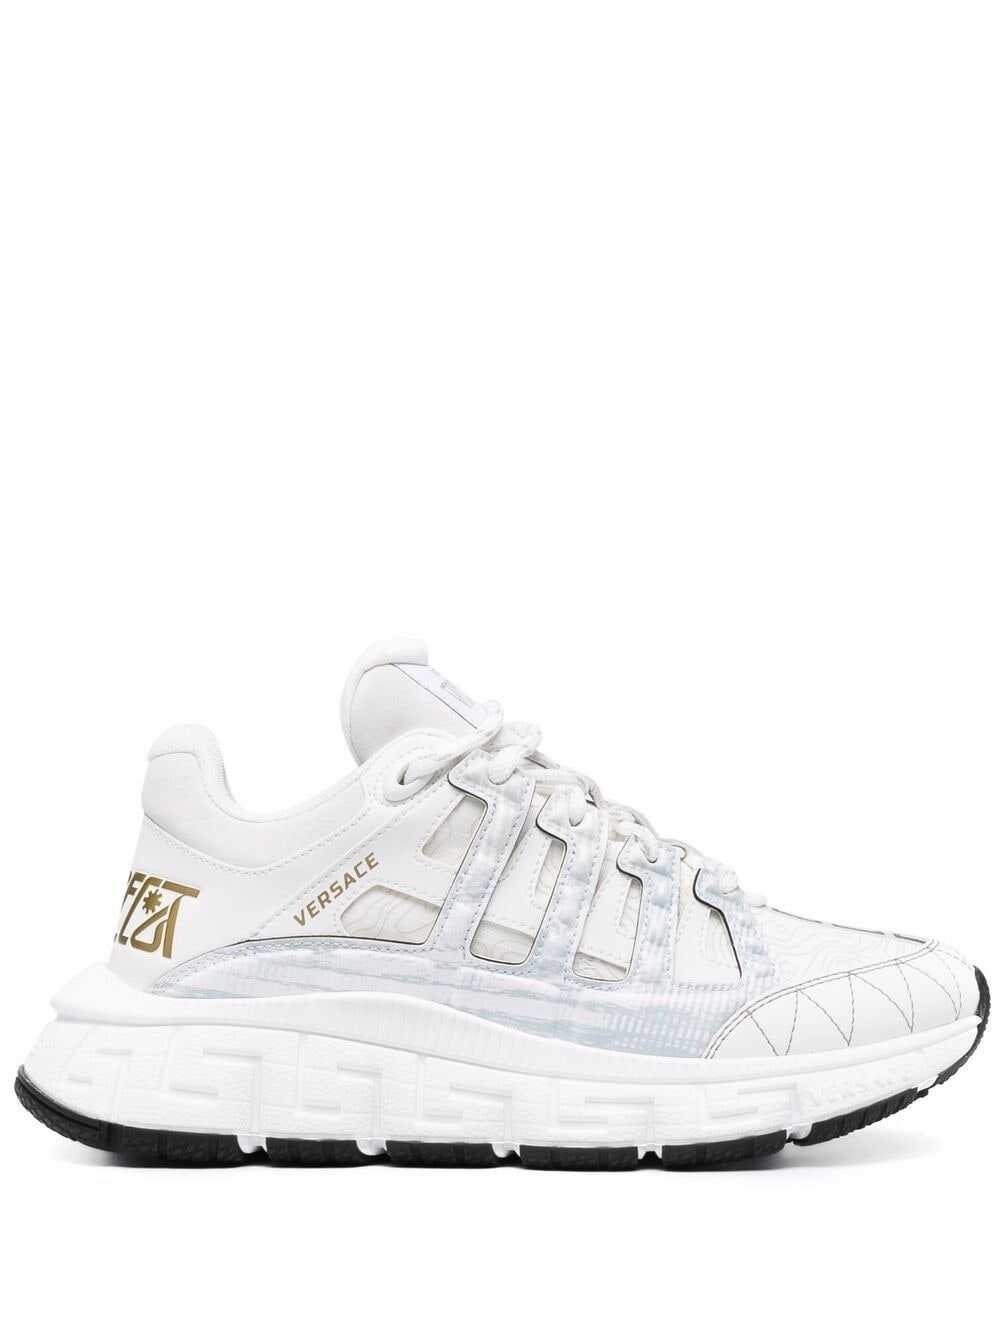 Versace Sneakers White White image15